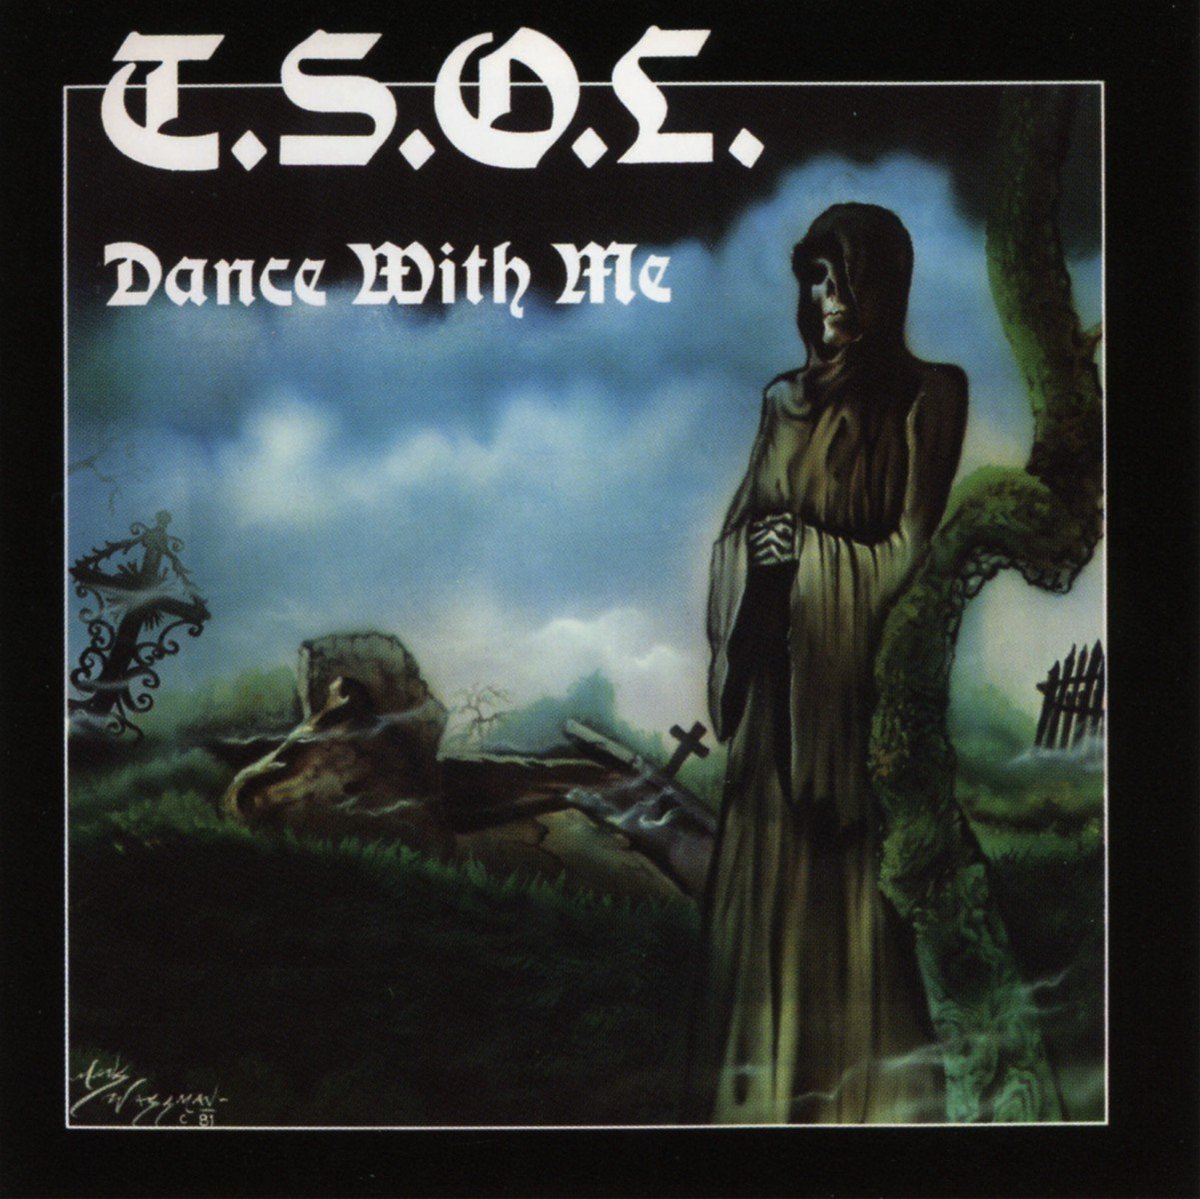 Image of T.S.O.L. "Dance with me" LP